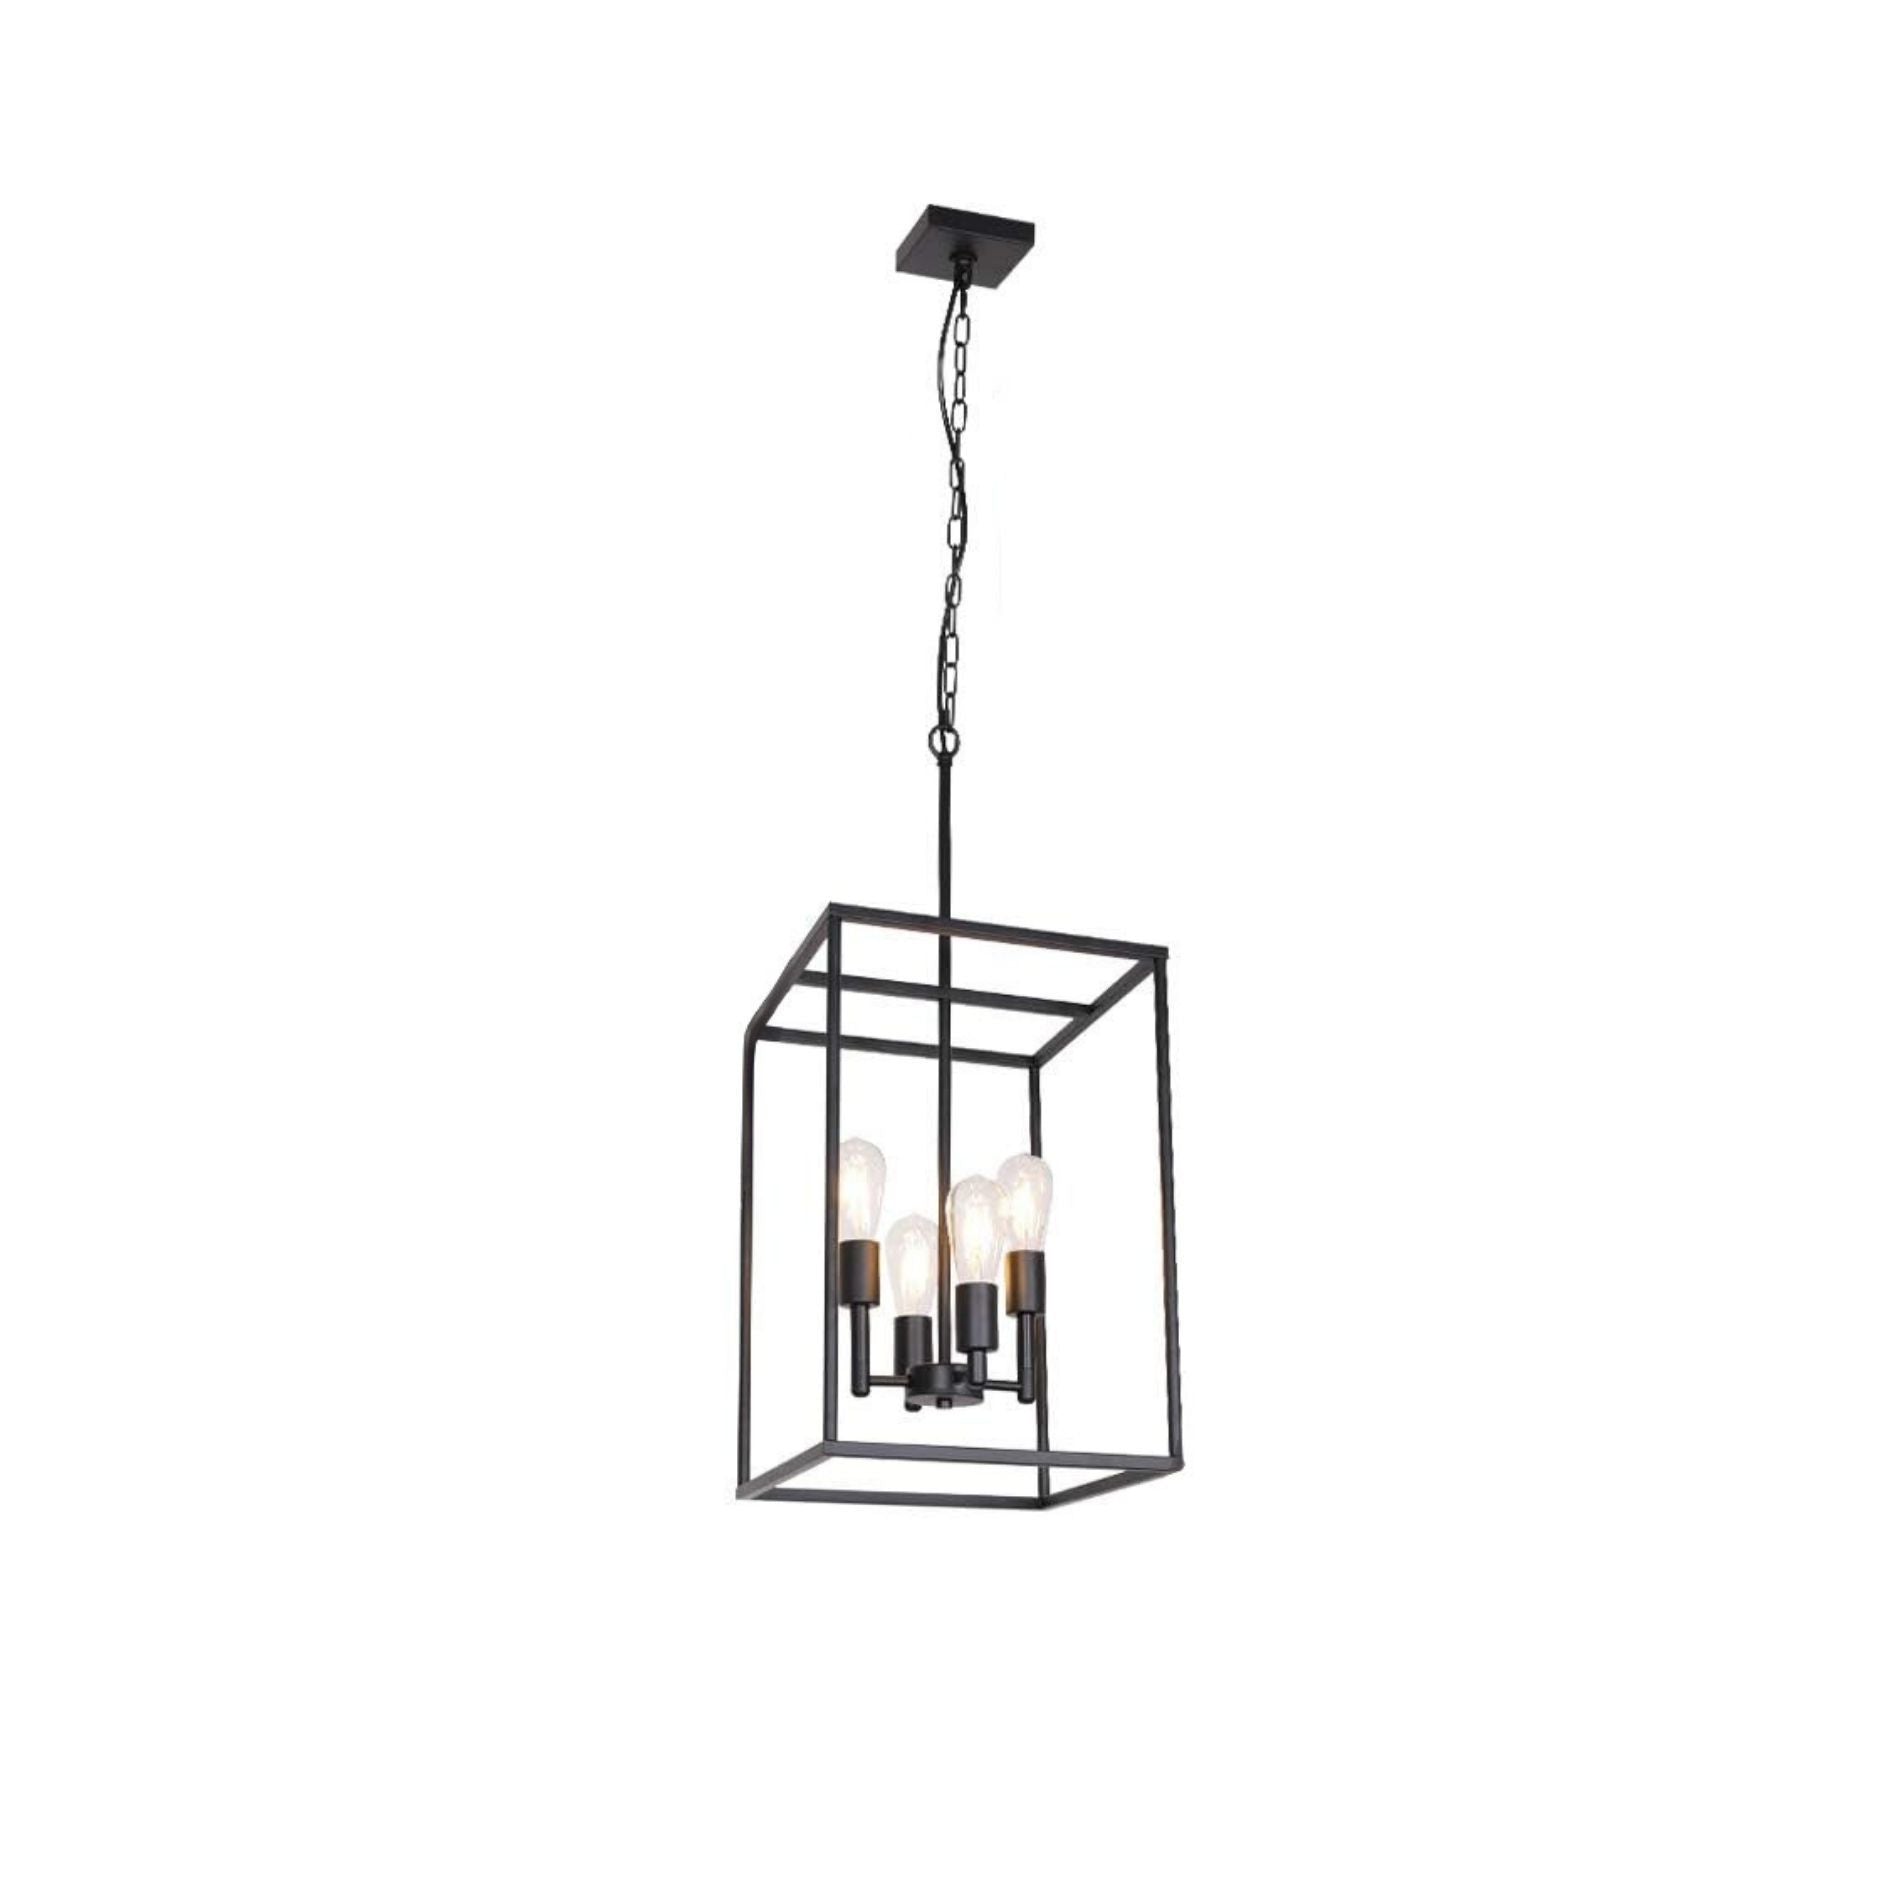 TM-HOME-4-Light-Large-Industrial-Metal-Pendant-Light-Black-Square-Wide-Cage-Chandelier-with-Painted-Finish-Lamps